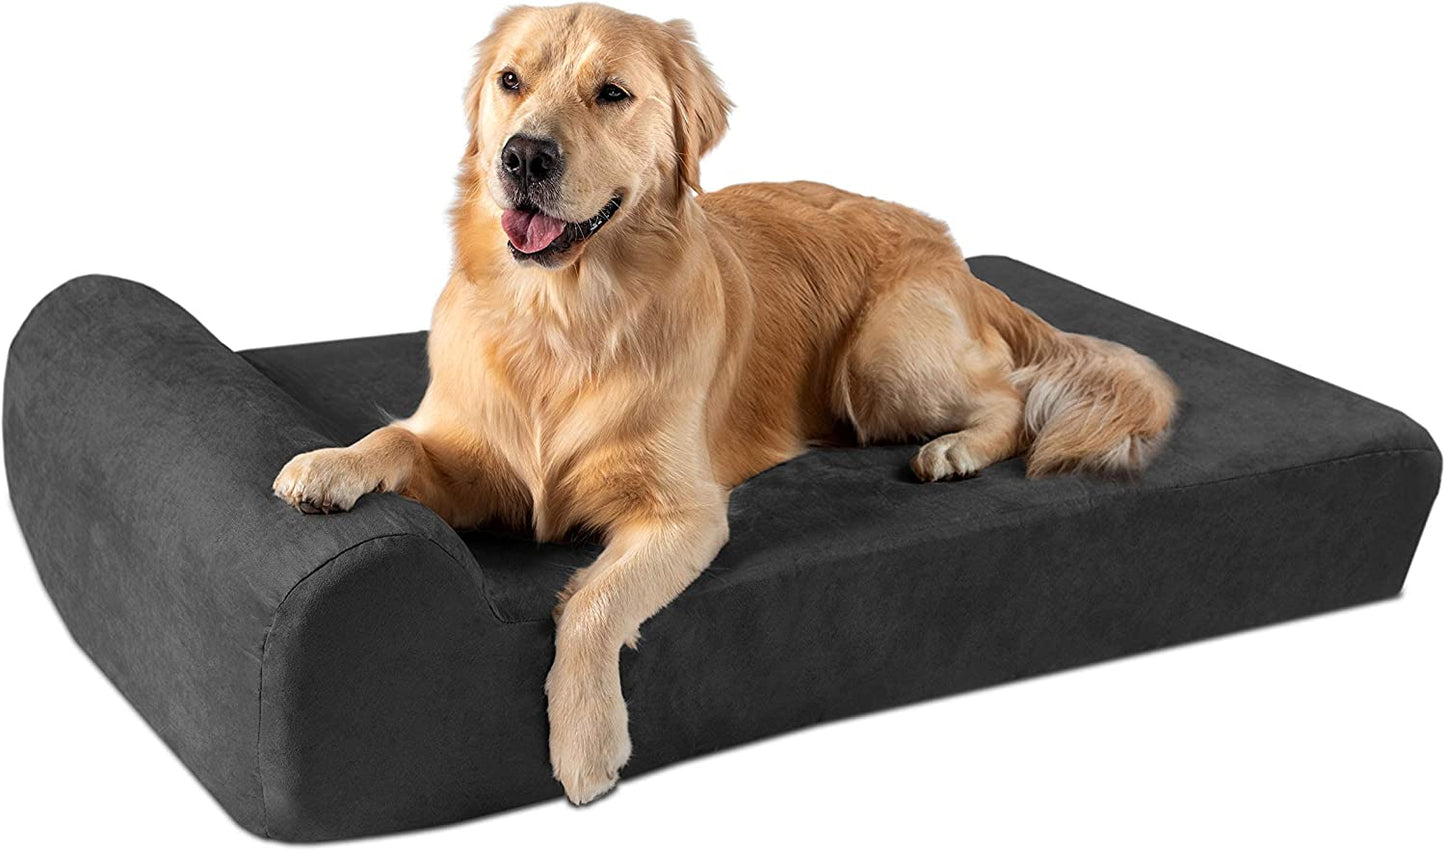 Orthopedic Dog Bed W/Headrest - 7” Dog Bed for Large Dogs W/Washable Microsuede Cover - Elevated Dog Bed Made in the USA W/ 10-Year Warranty (Headrest, Large, Charcoal)